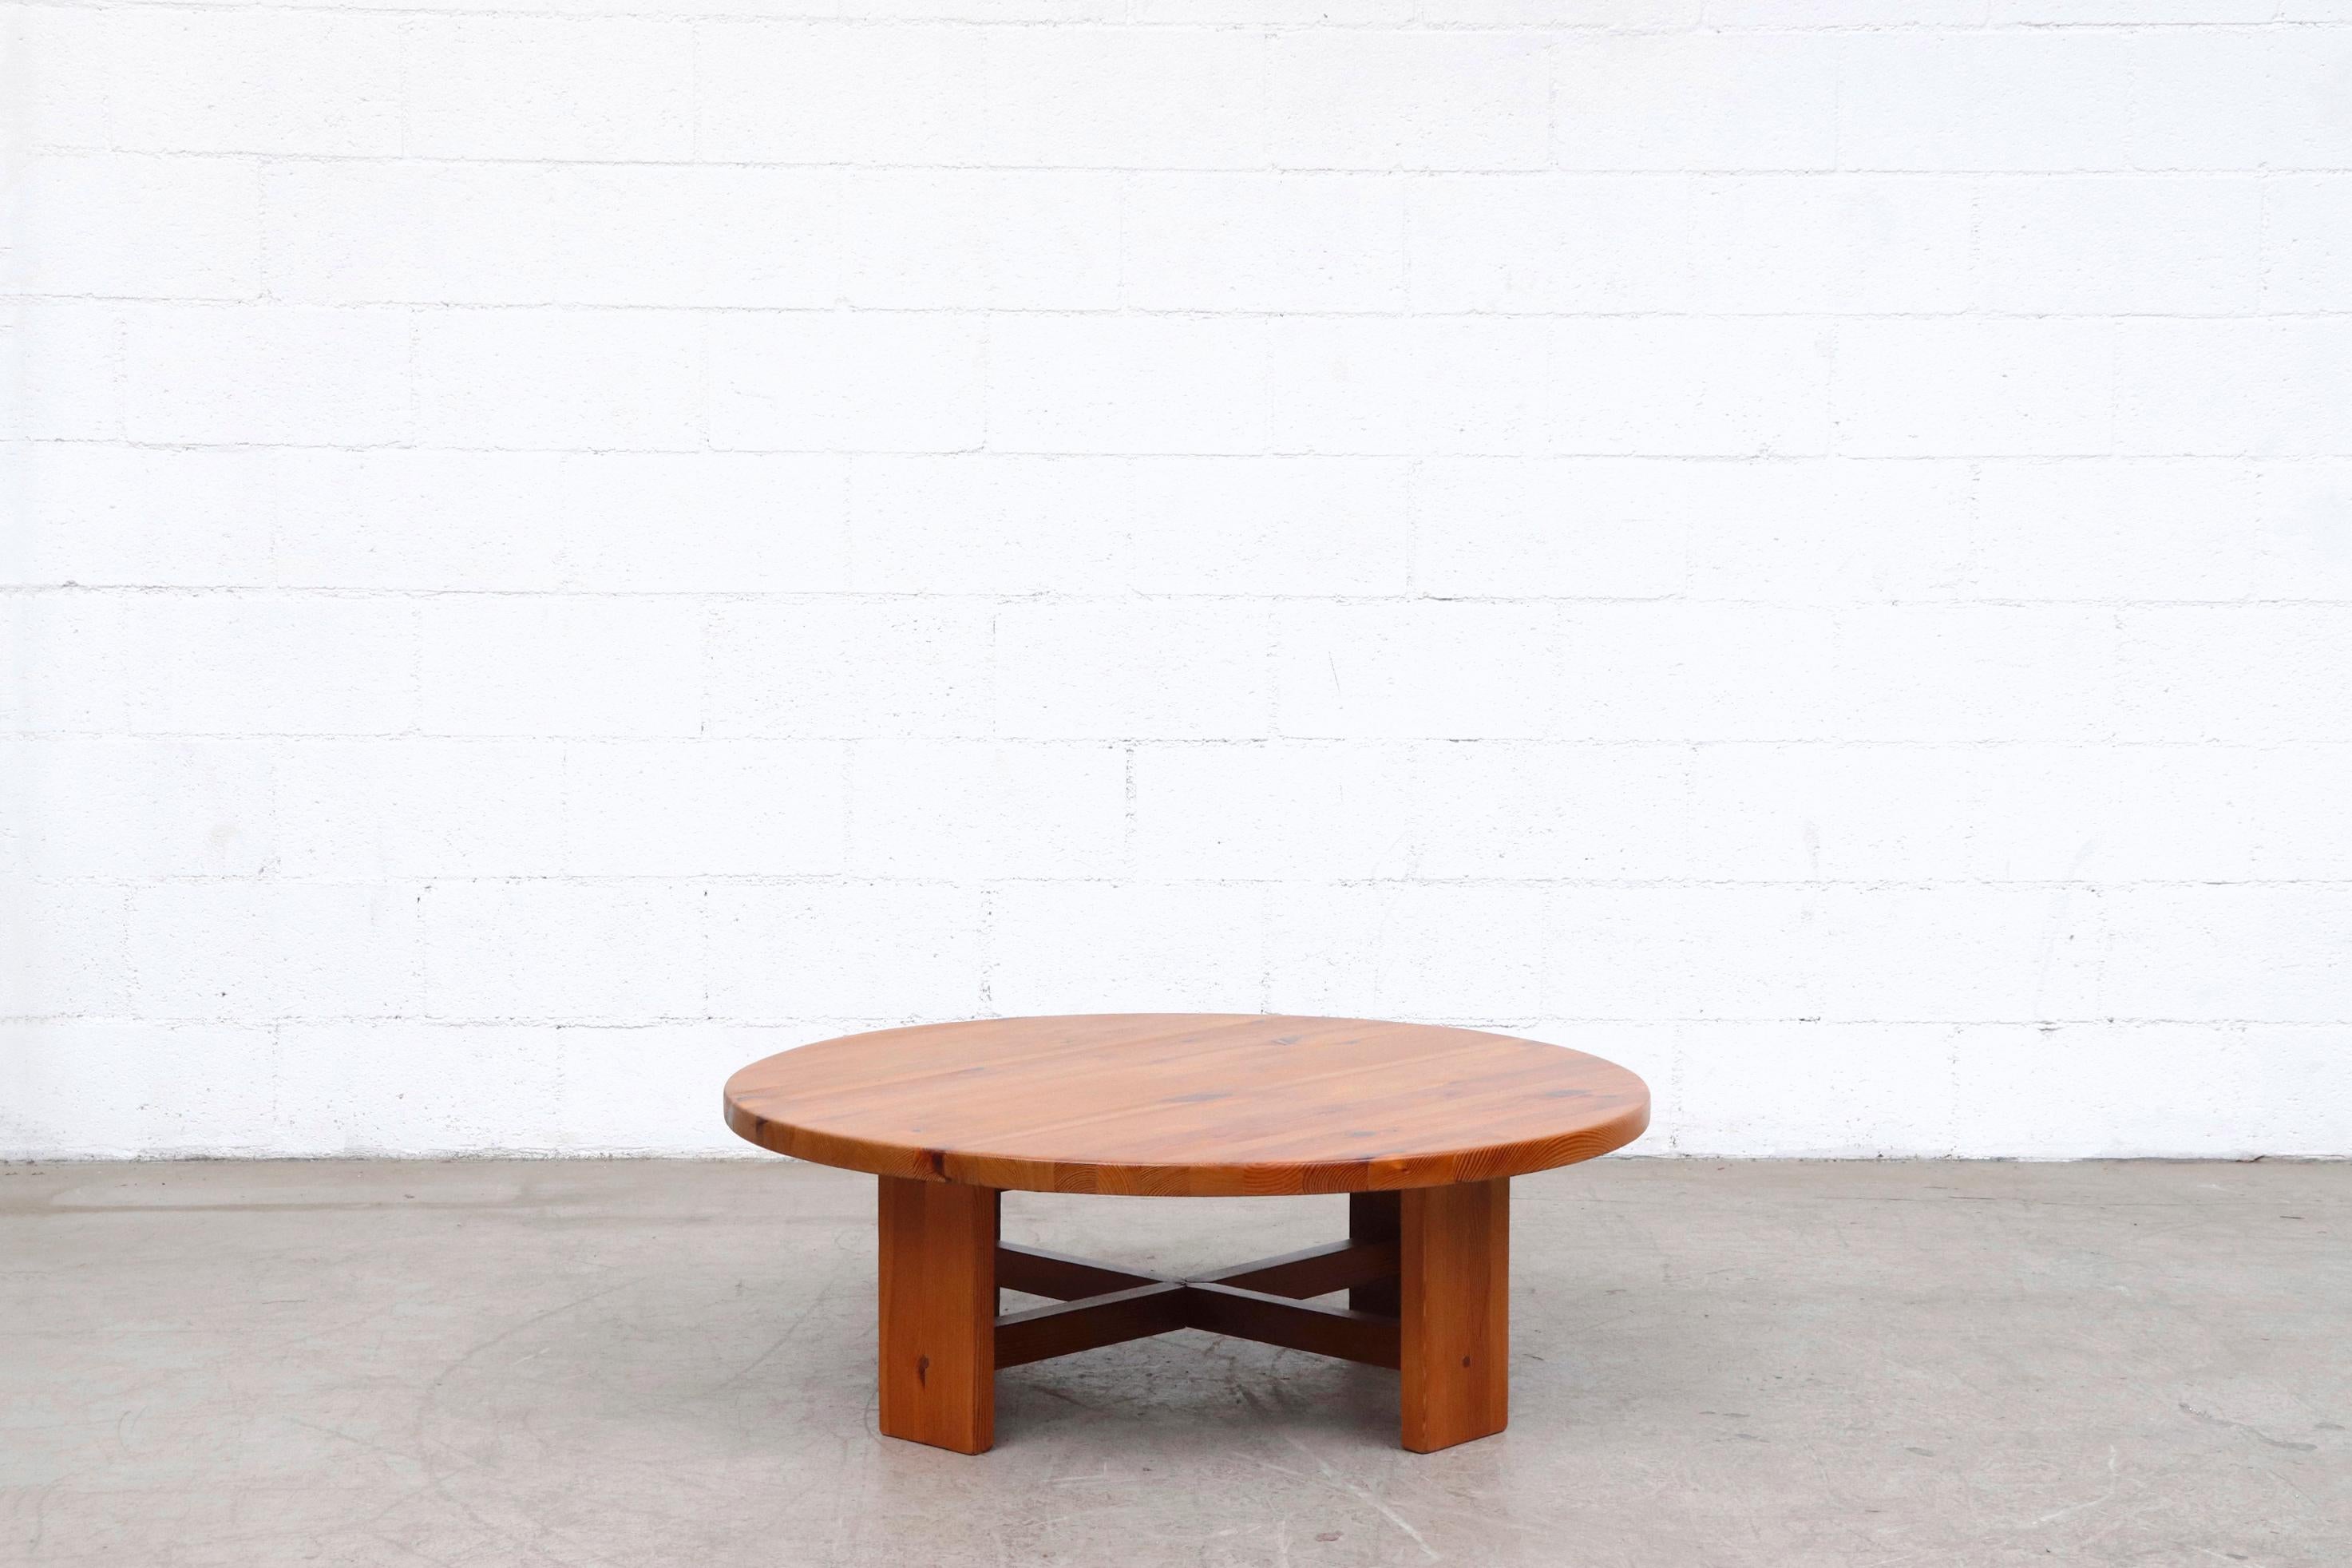 Midcentury Ate Van Apeldoorn round pine coffee table lightly refinished with some visible wear and scratching consistent with age and use. Handsome blocky design.